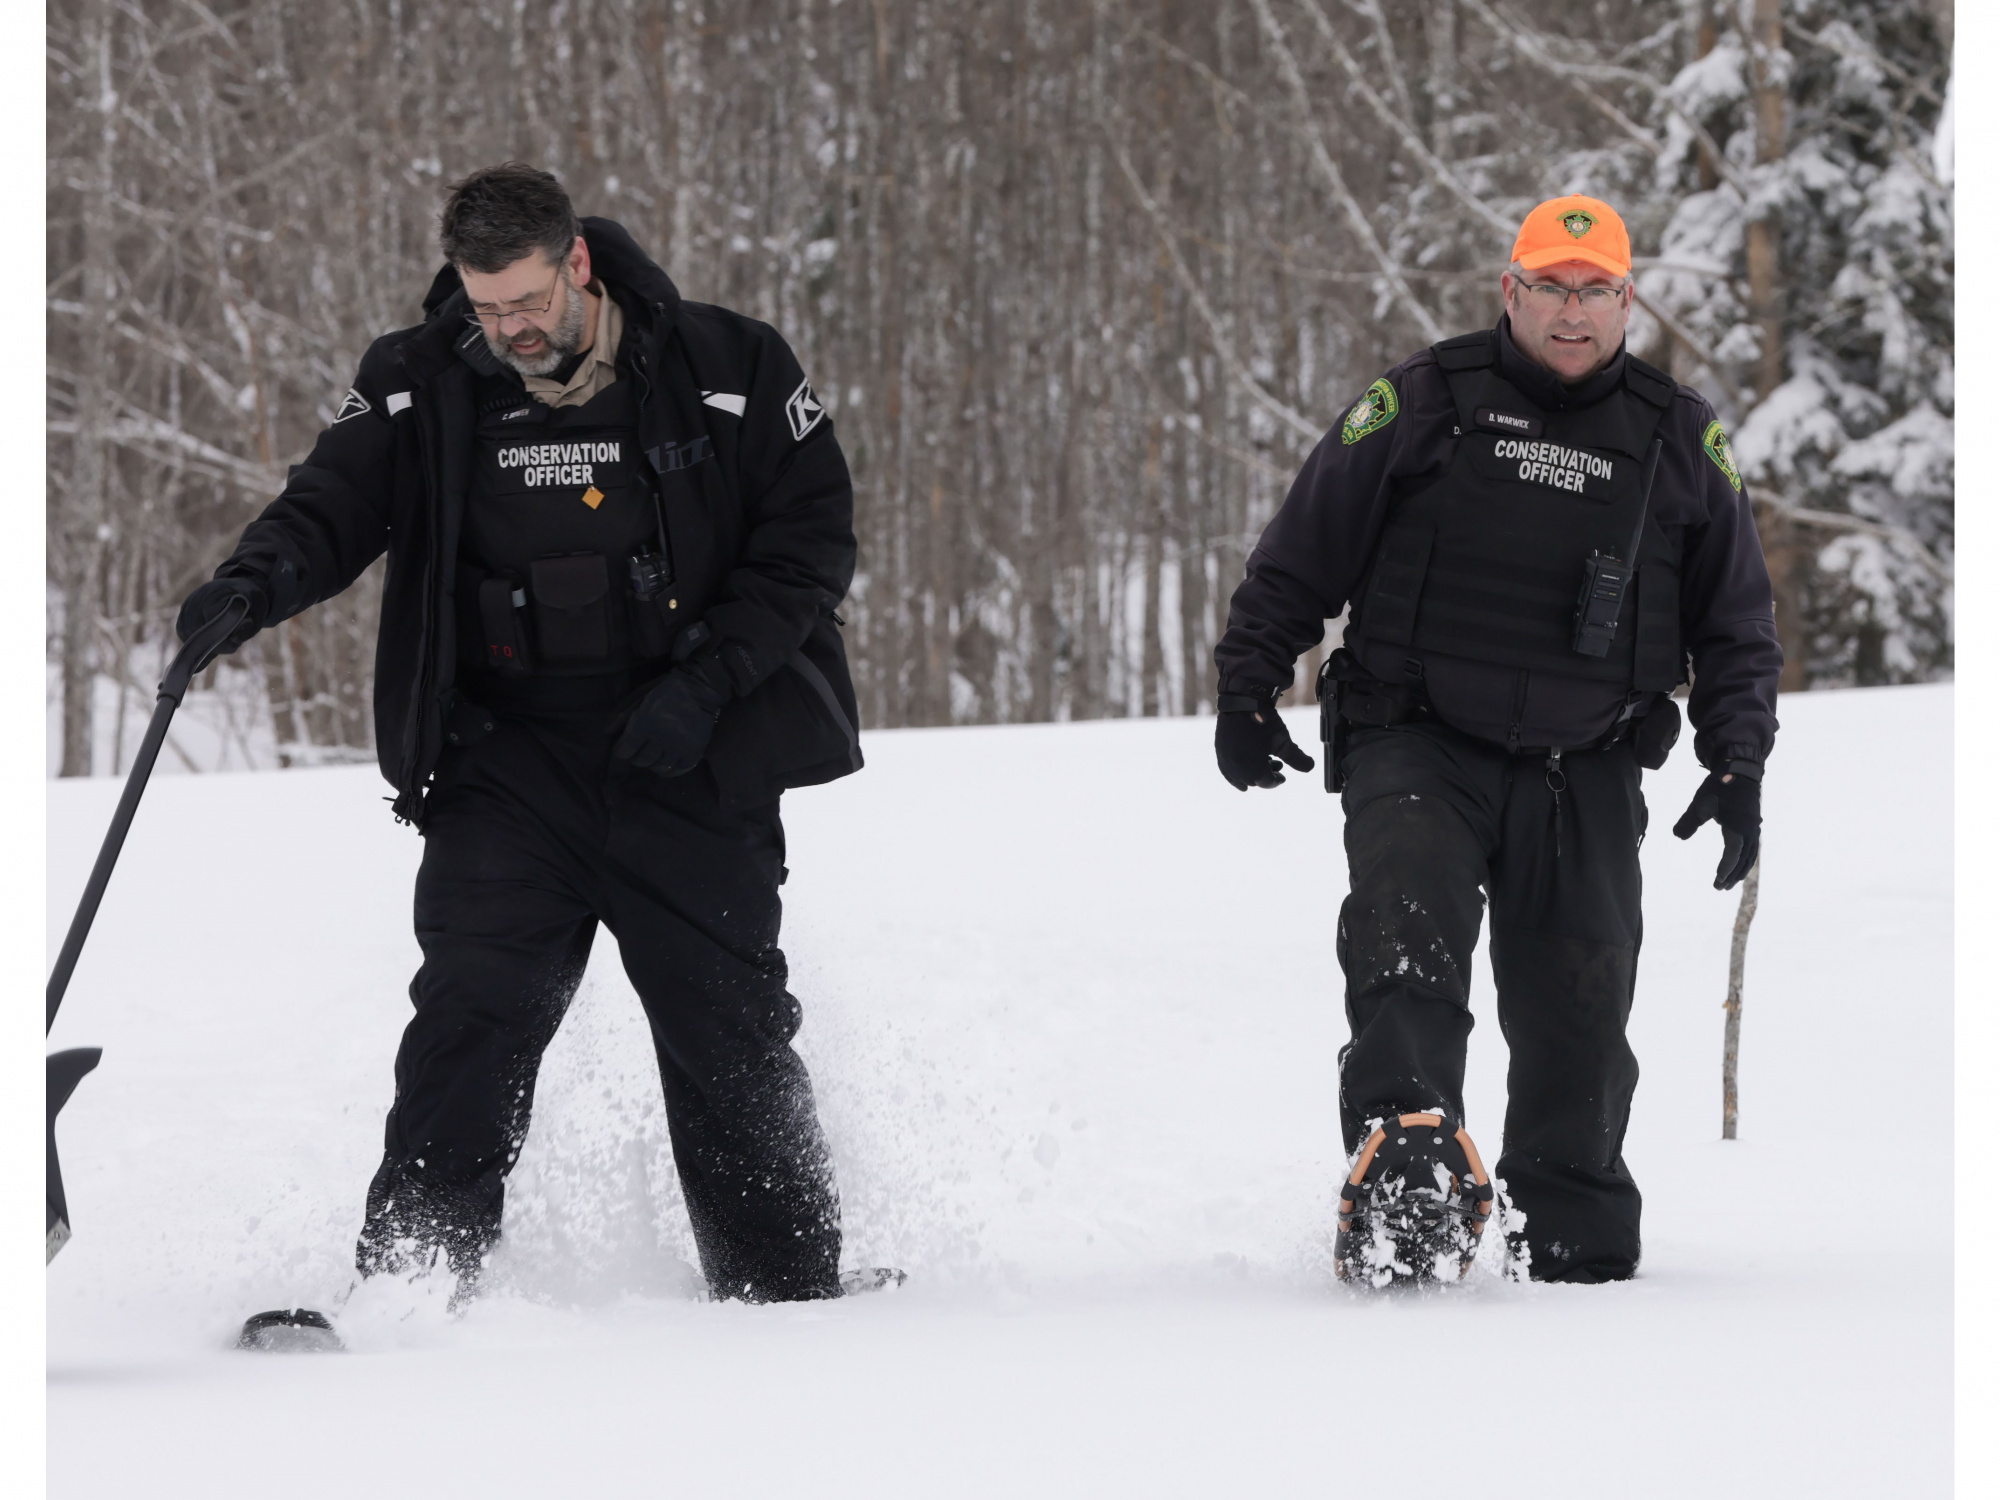 Photo of conservation officers on snowshoes walking 